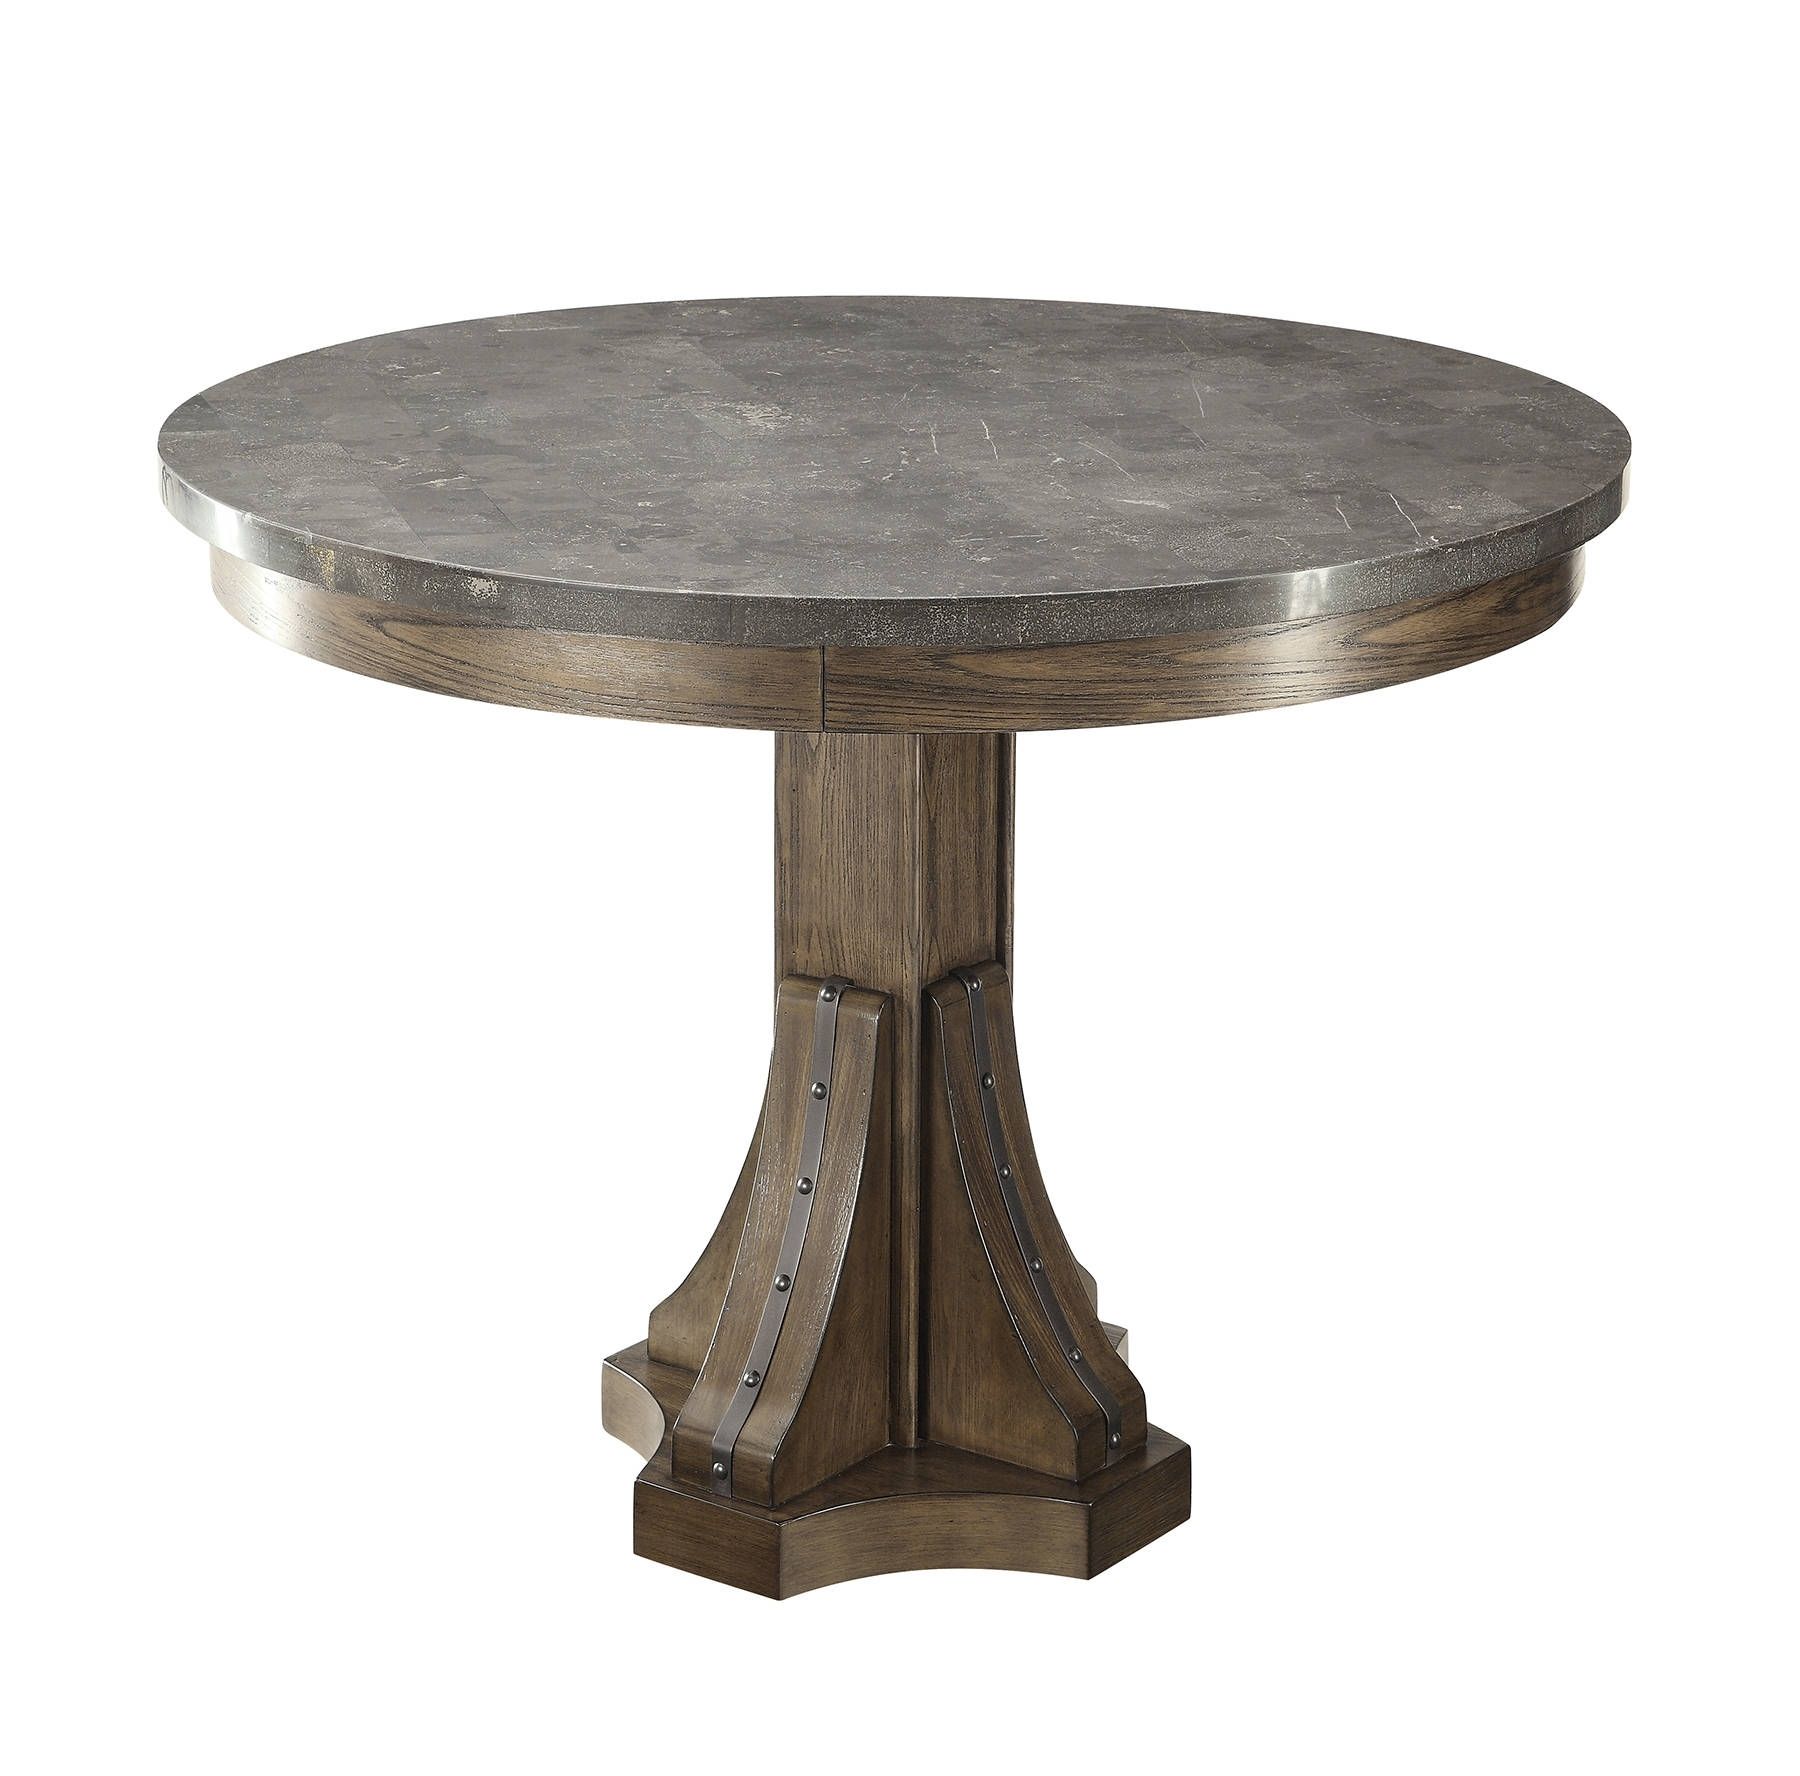 Best And Newest Willowbrook Craftsman Ash Bluestone Laminate Top Round Dining Table Within Craftsman Round Dining Tables (View 22 of 25)